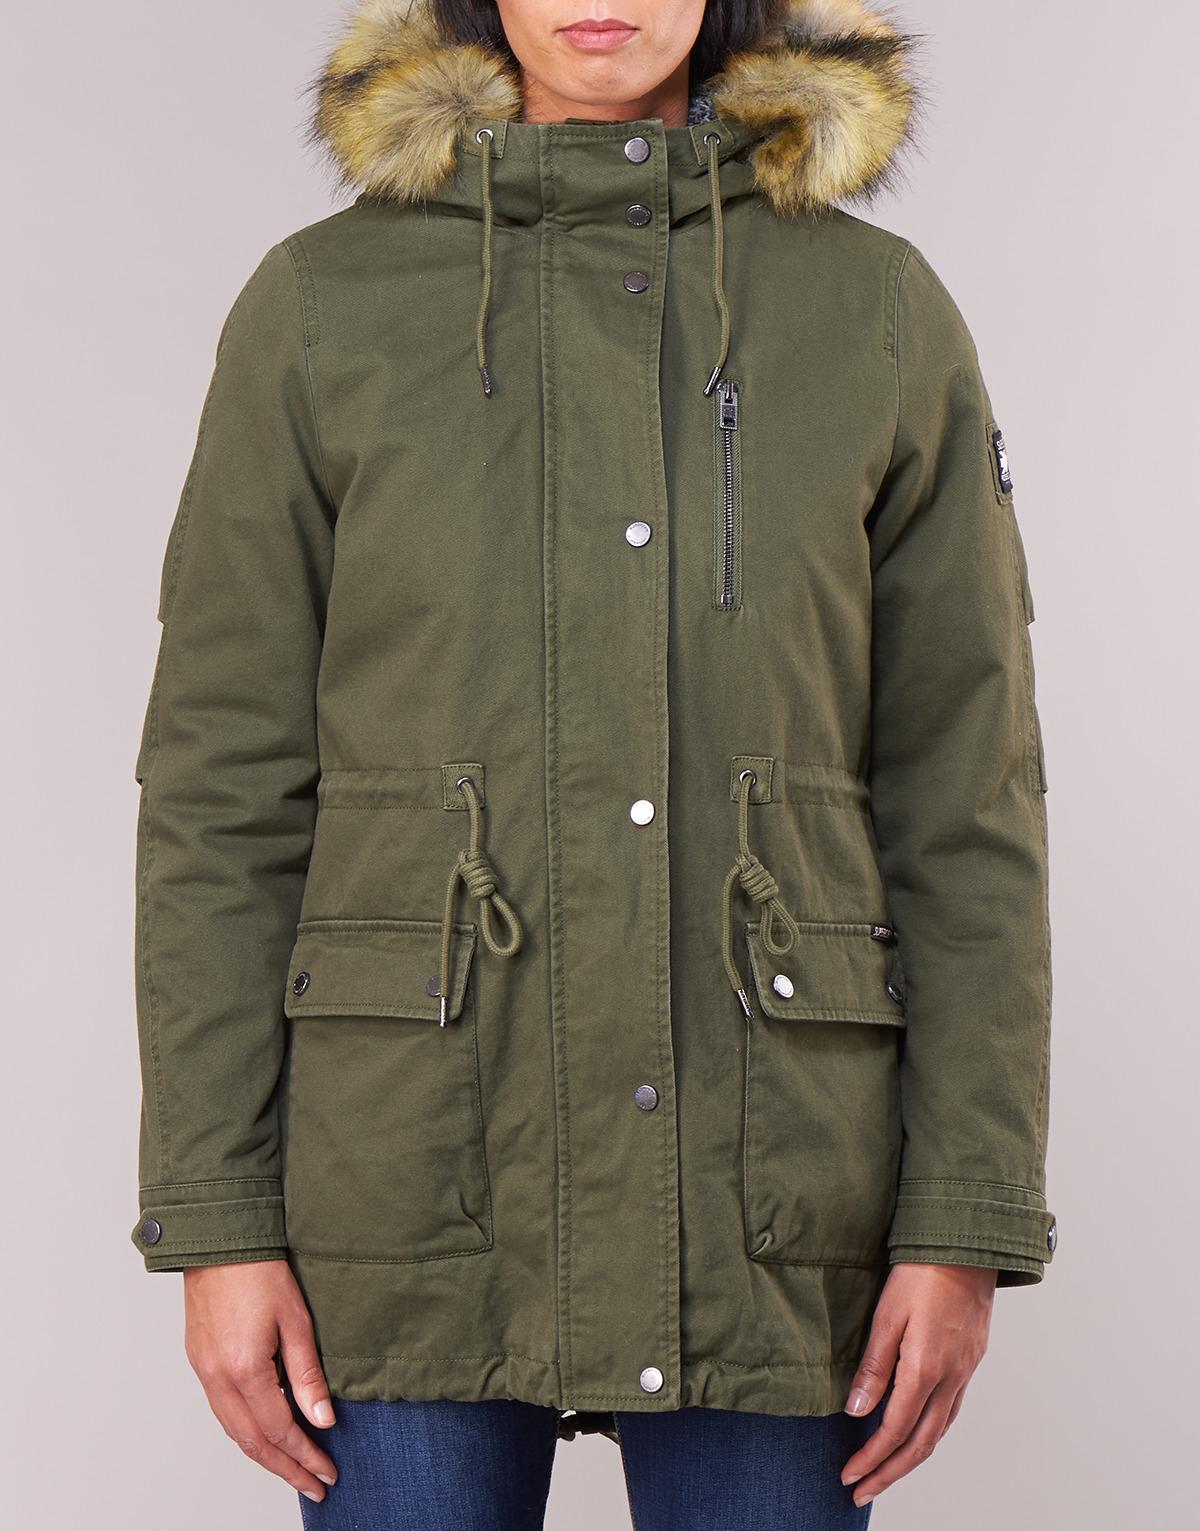 Superdry Lucy Rookie in Khaki (Green) - Save 43% - Lyst